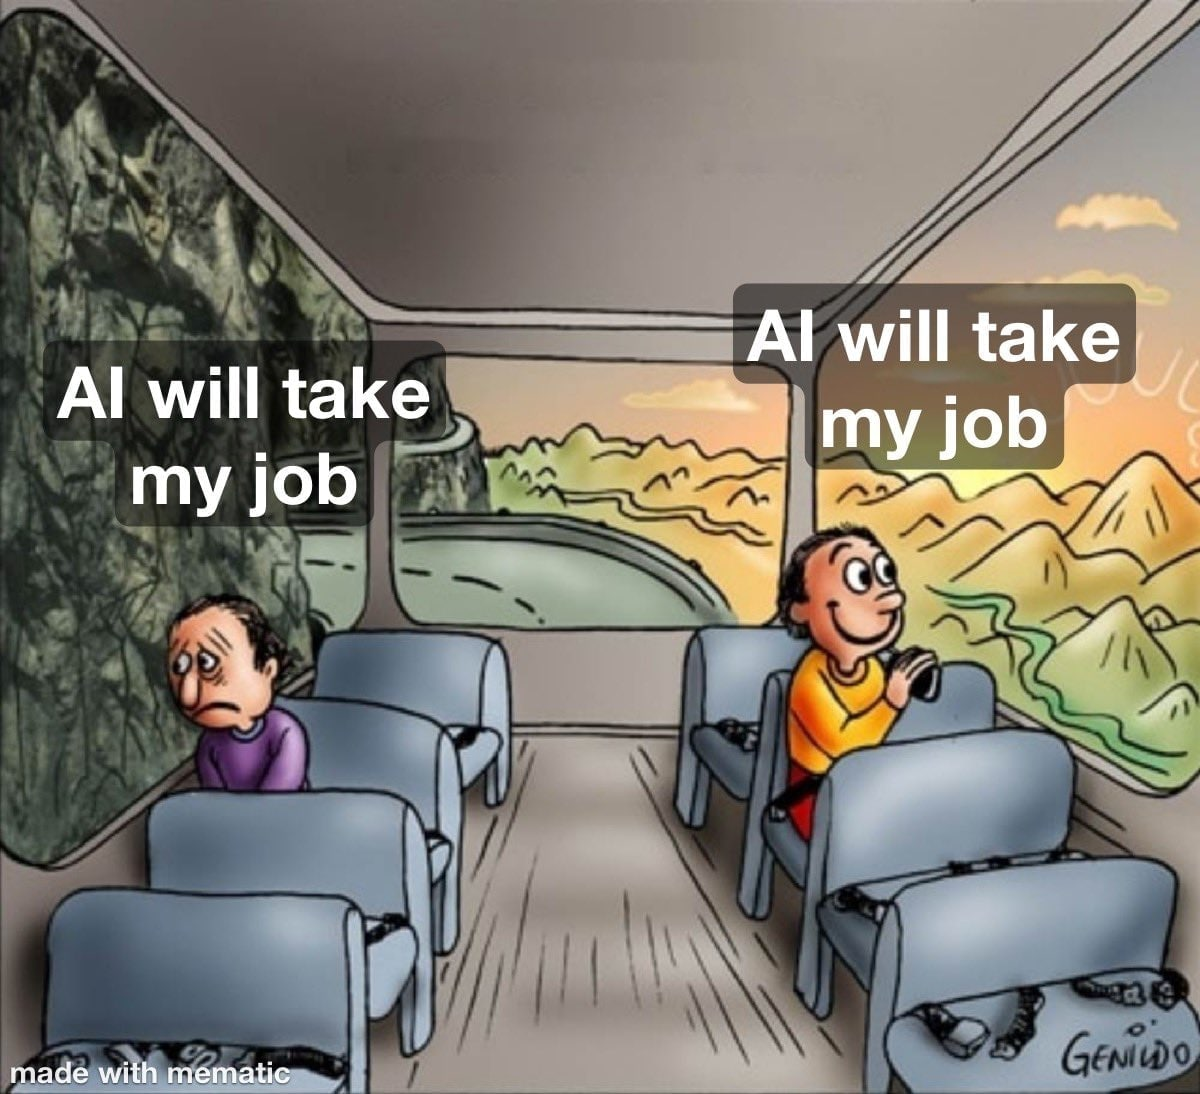 Cartoon illustration showing two men sitting on a bus, on either side of the aisle. One man is happy and the other man is sad both with the phrase “AI will take my job” above them.